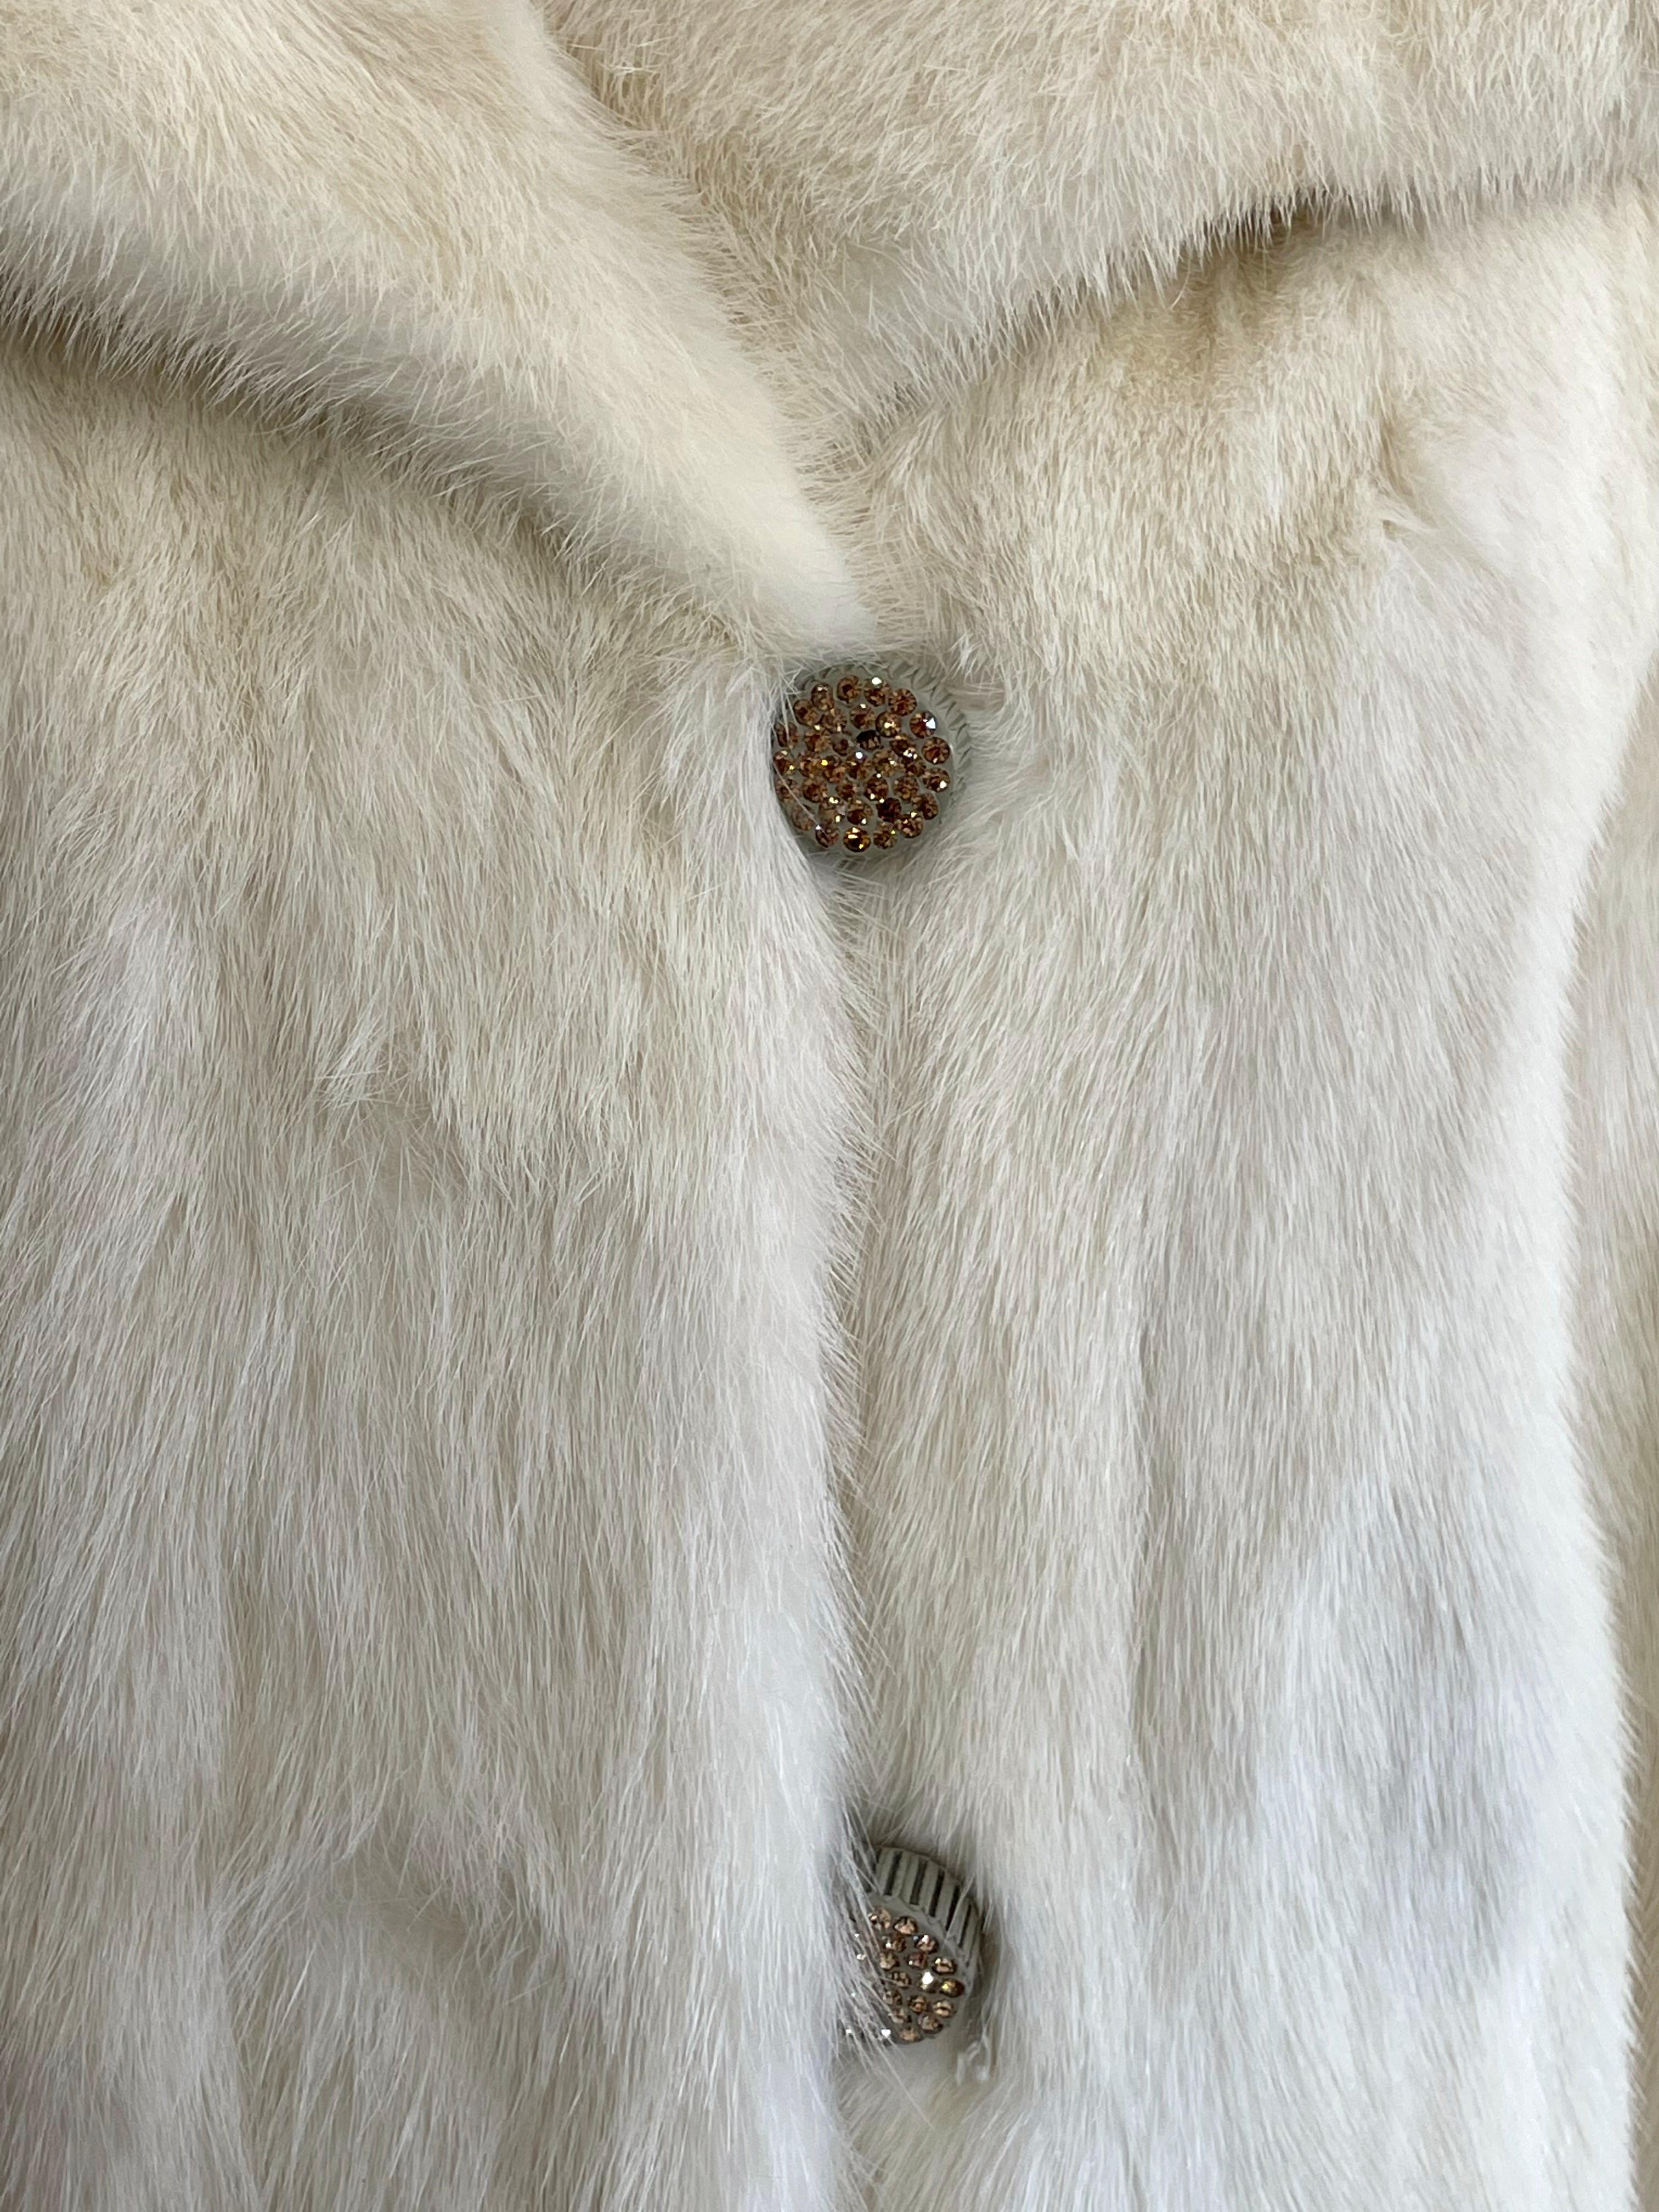 Ivory Mink Coat Classic Cut Double Breasted Jacket  In Good Condition For Sale In Wallkill, NY